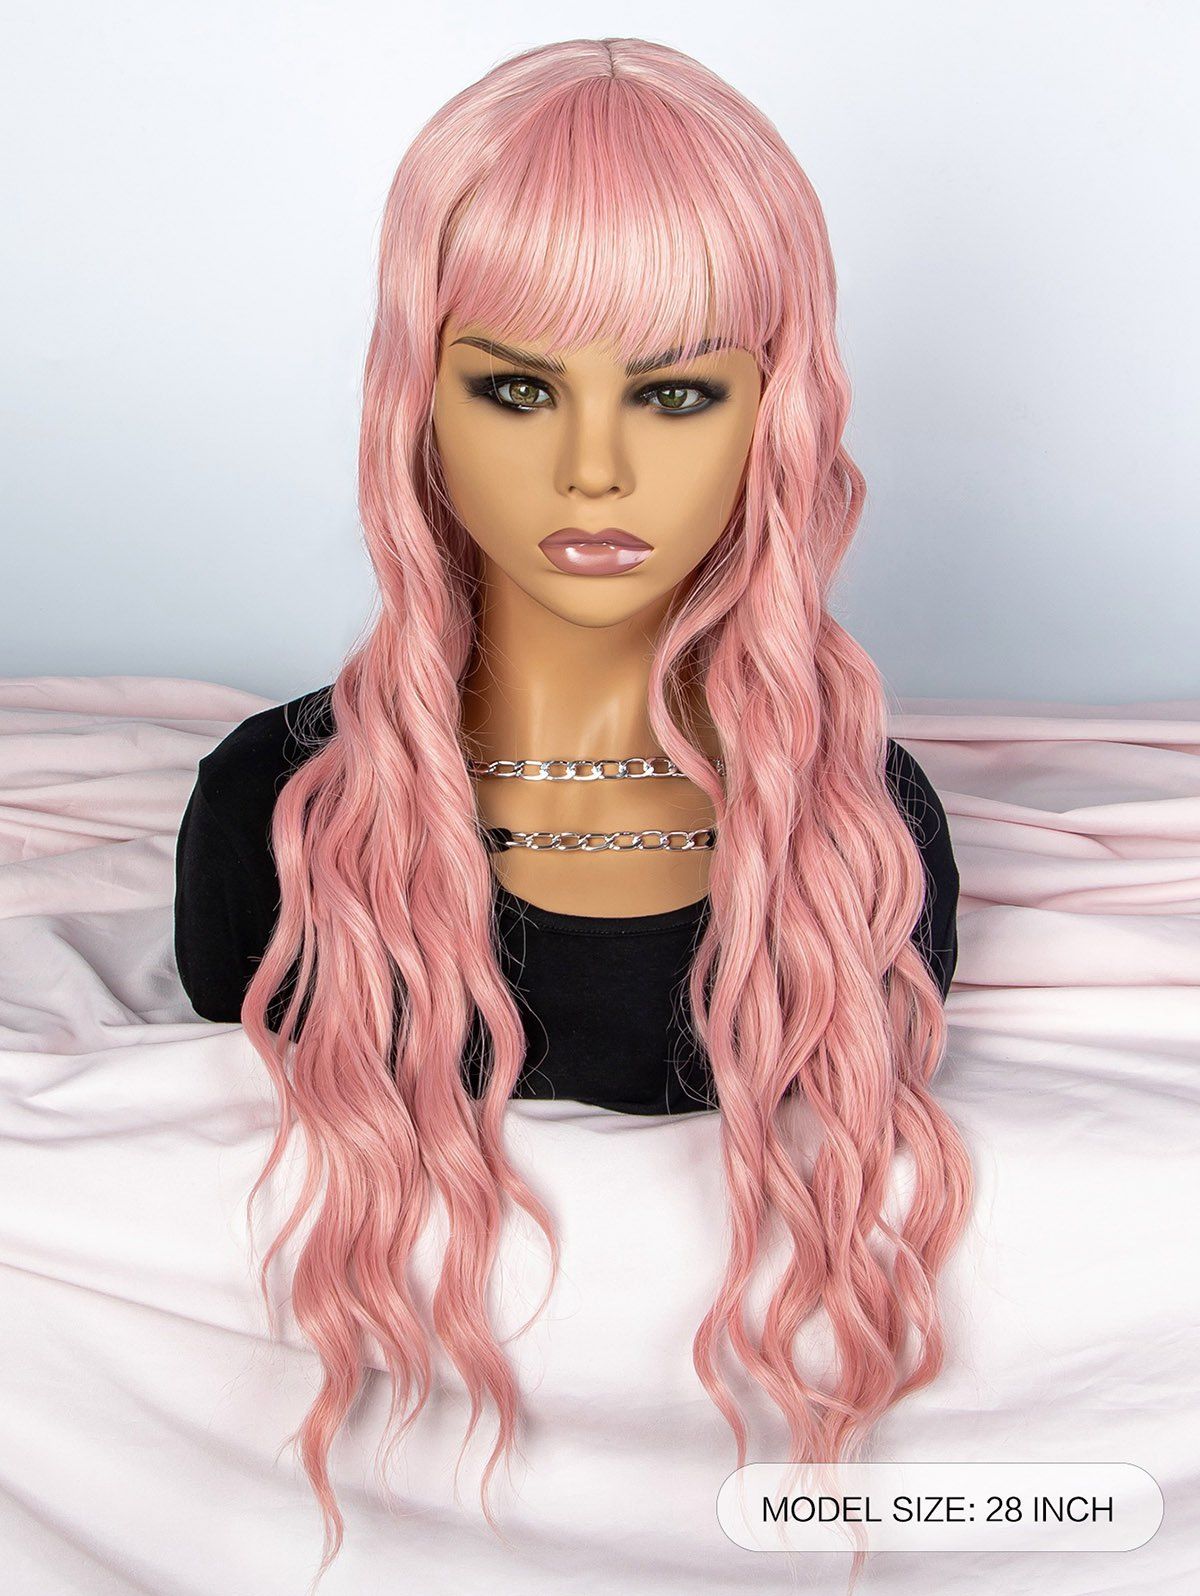 Full Bang Long Wavy Capless Heat Resistant Synthetic Cosplay Party Wig - PINK 28INCH